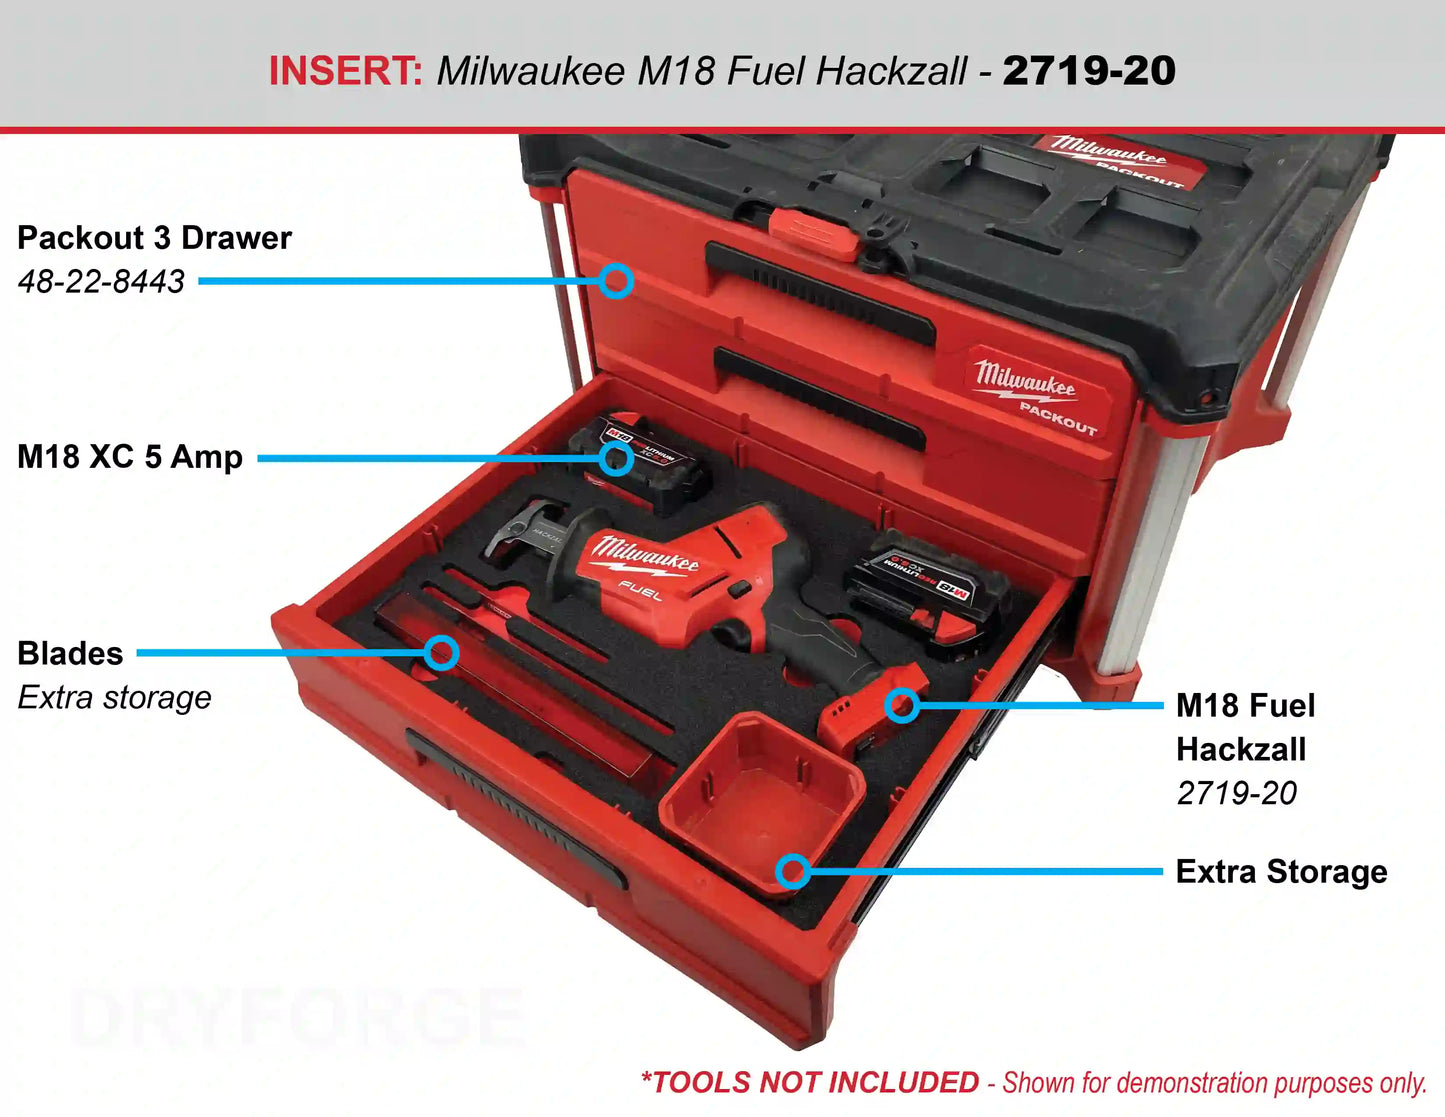 FOAM INSERT to store M18 Fuel Hackzall 2719-20 in a Milwaukee Packout 2 Drawer Tool Box - Tools NOT Included